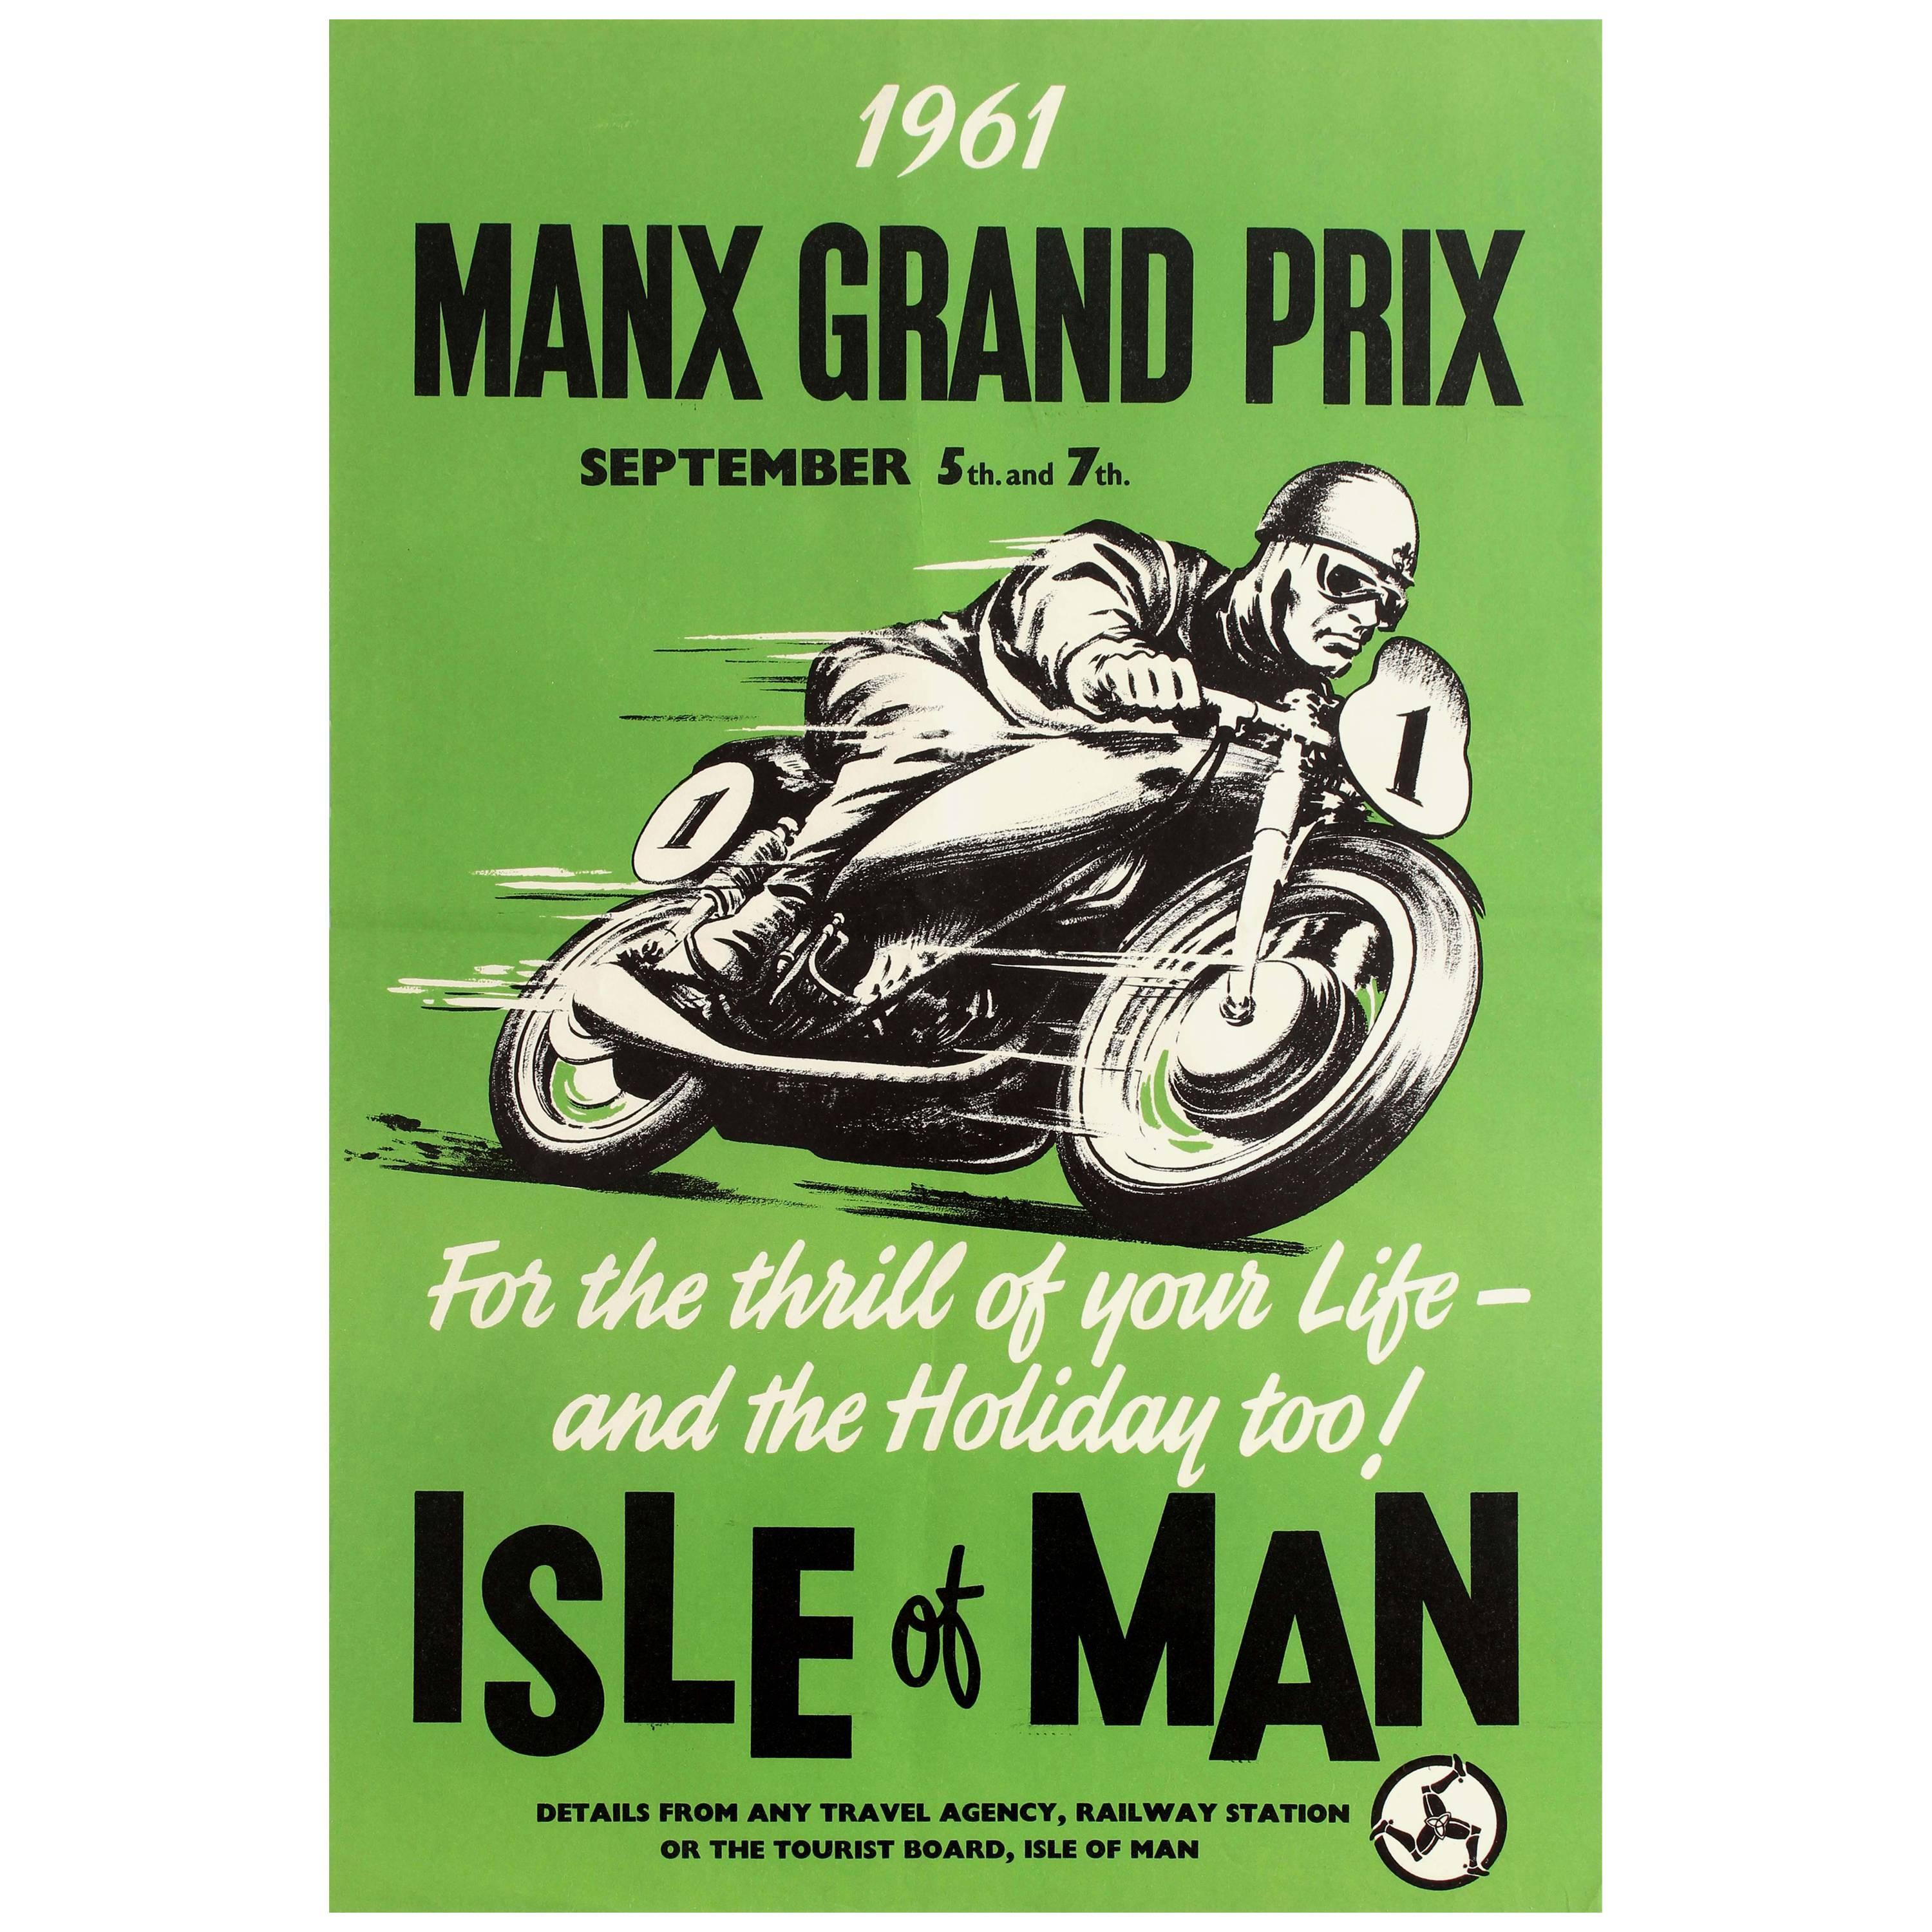 Original Vintage Manx Grand Prix Motorcycle Poster - For The Thrill of Your Life